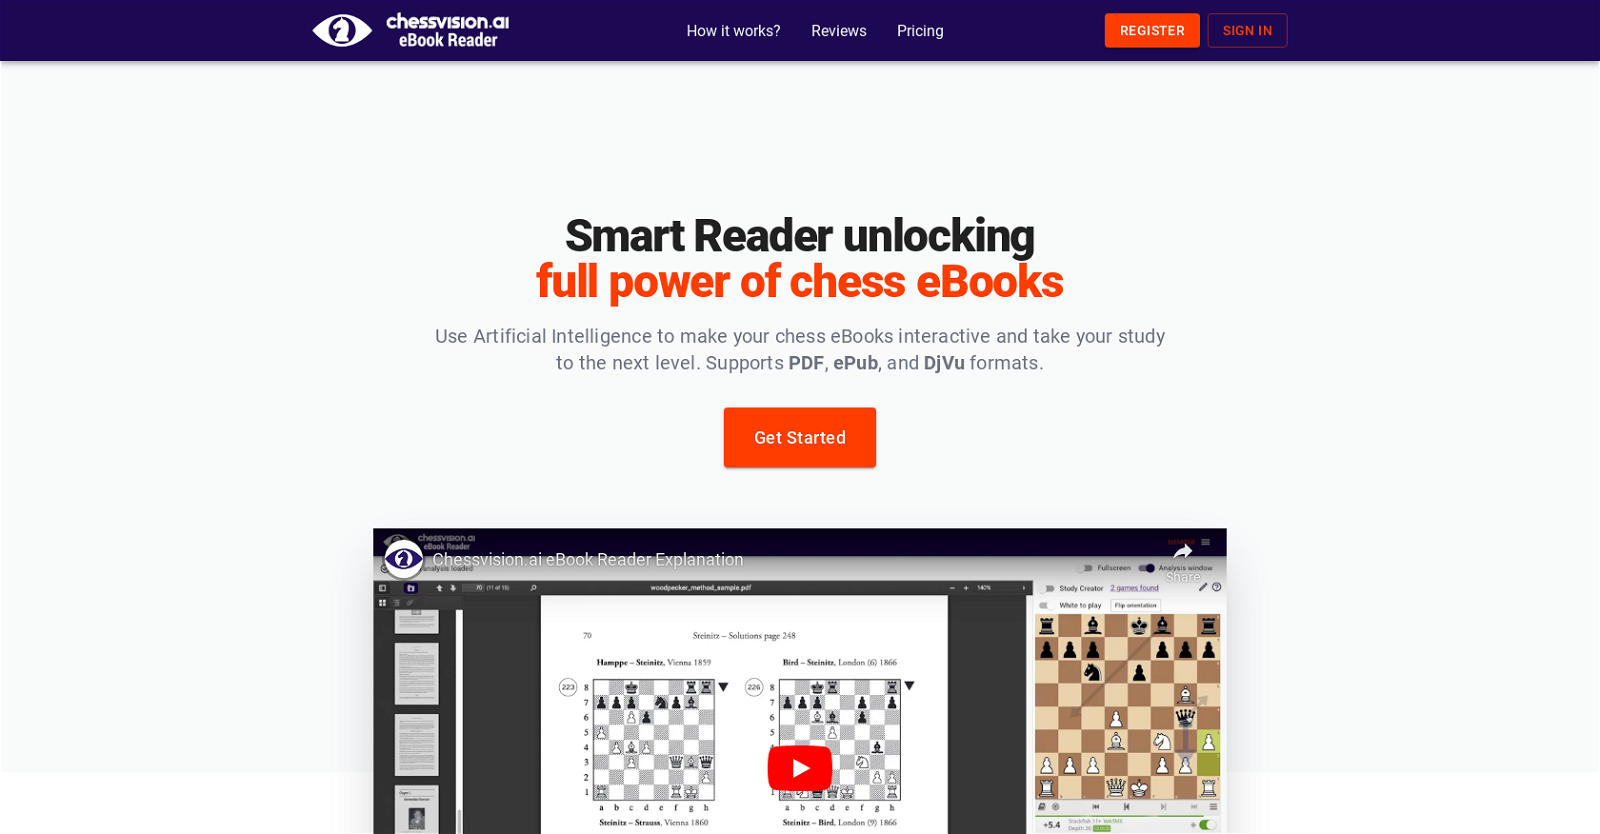 I made eBook Reader that uses AI to make chess books interactive